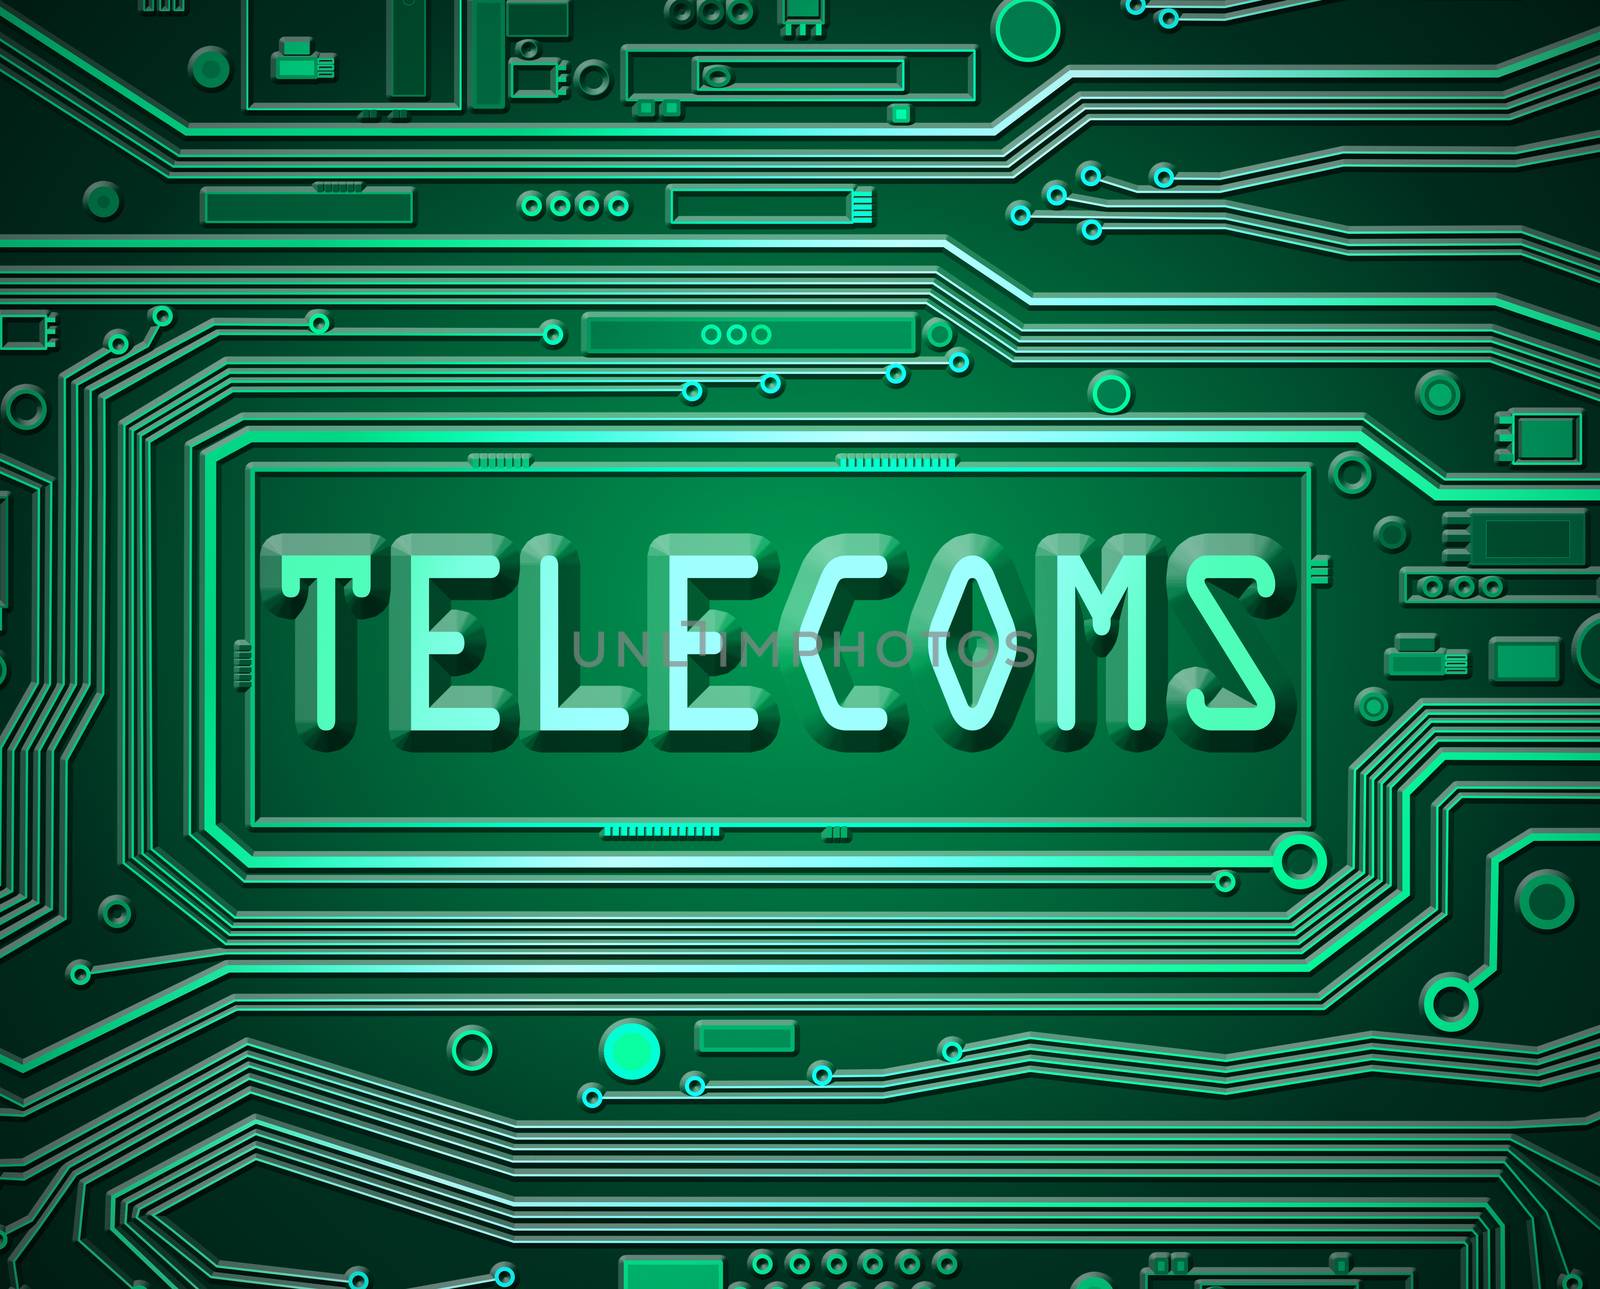 Abstract style illustration depicting printed circuit board components with a telecoms concept.